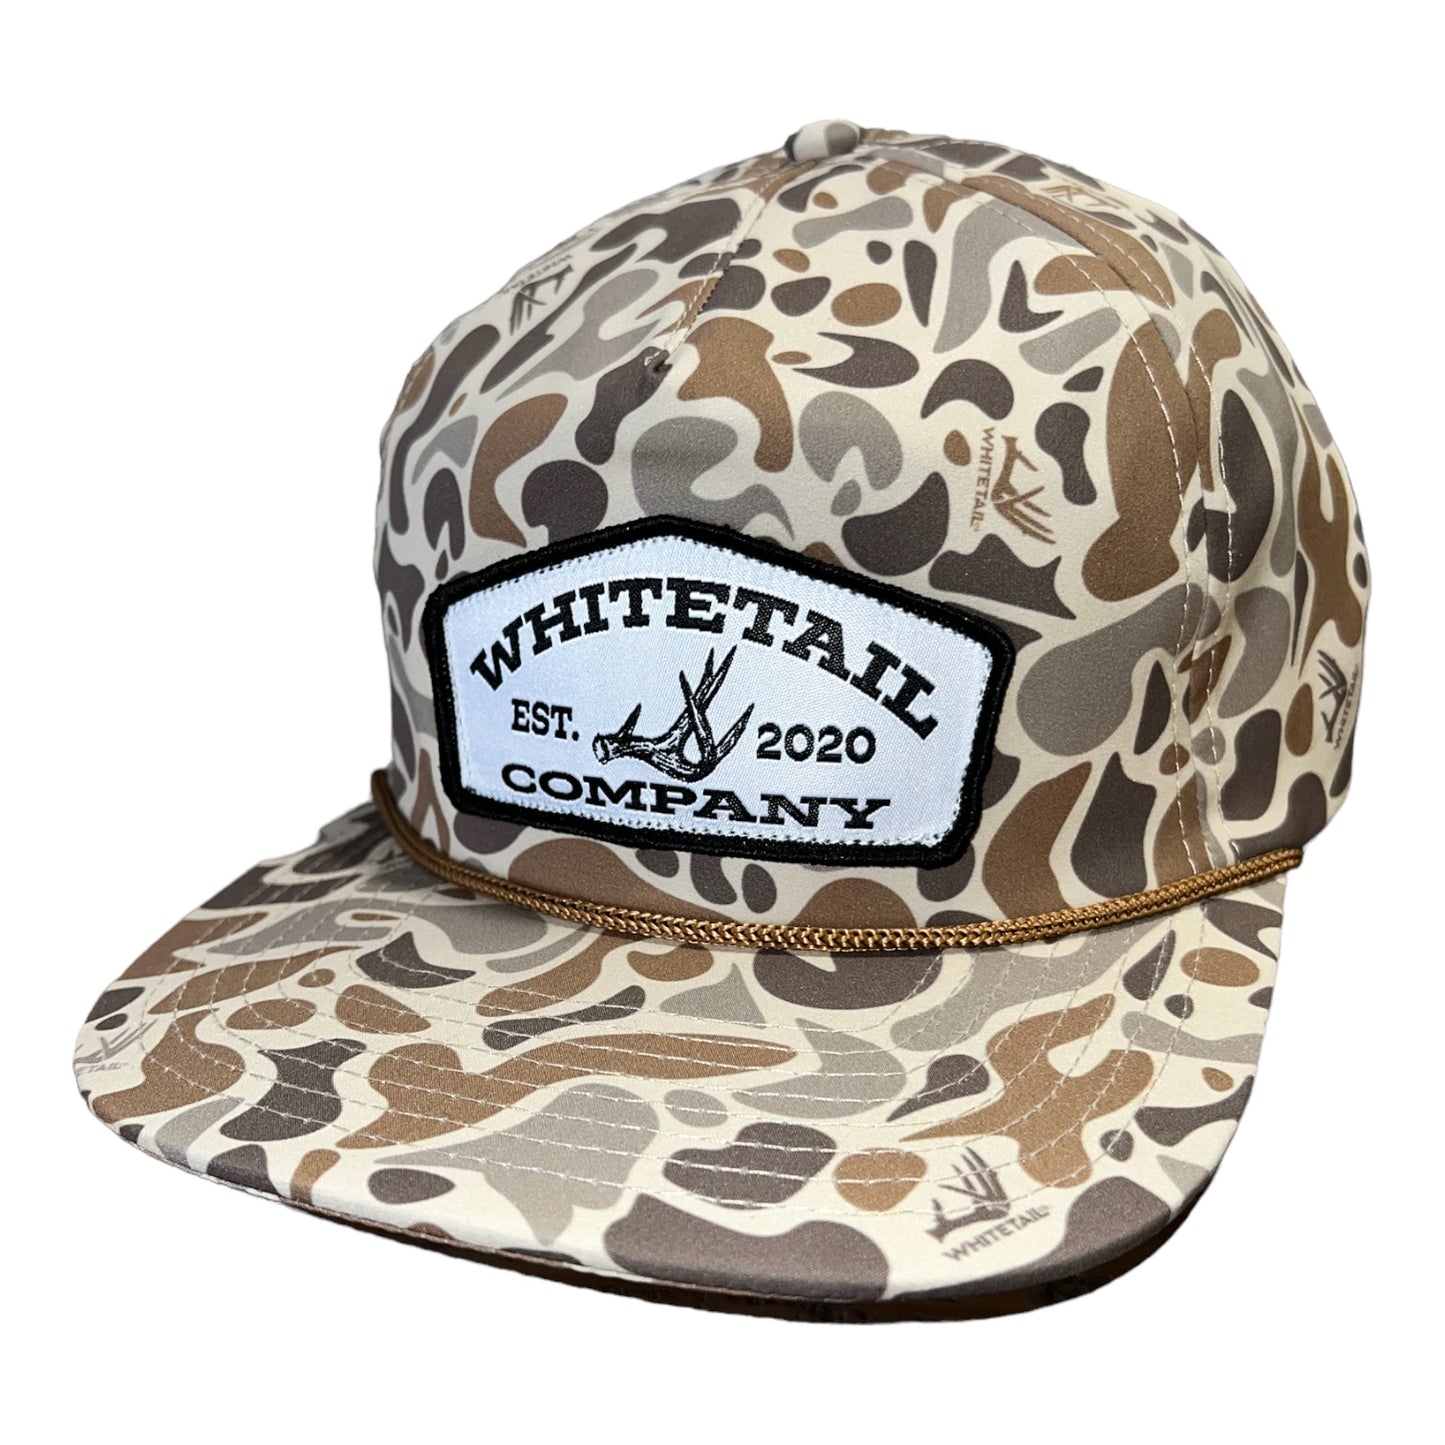 Whitetail Co. Old Camo Ropy Trucker Non Structured Shed Patch